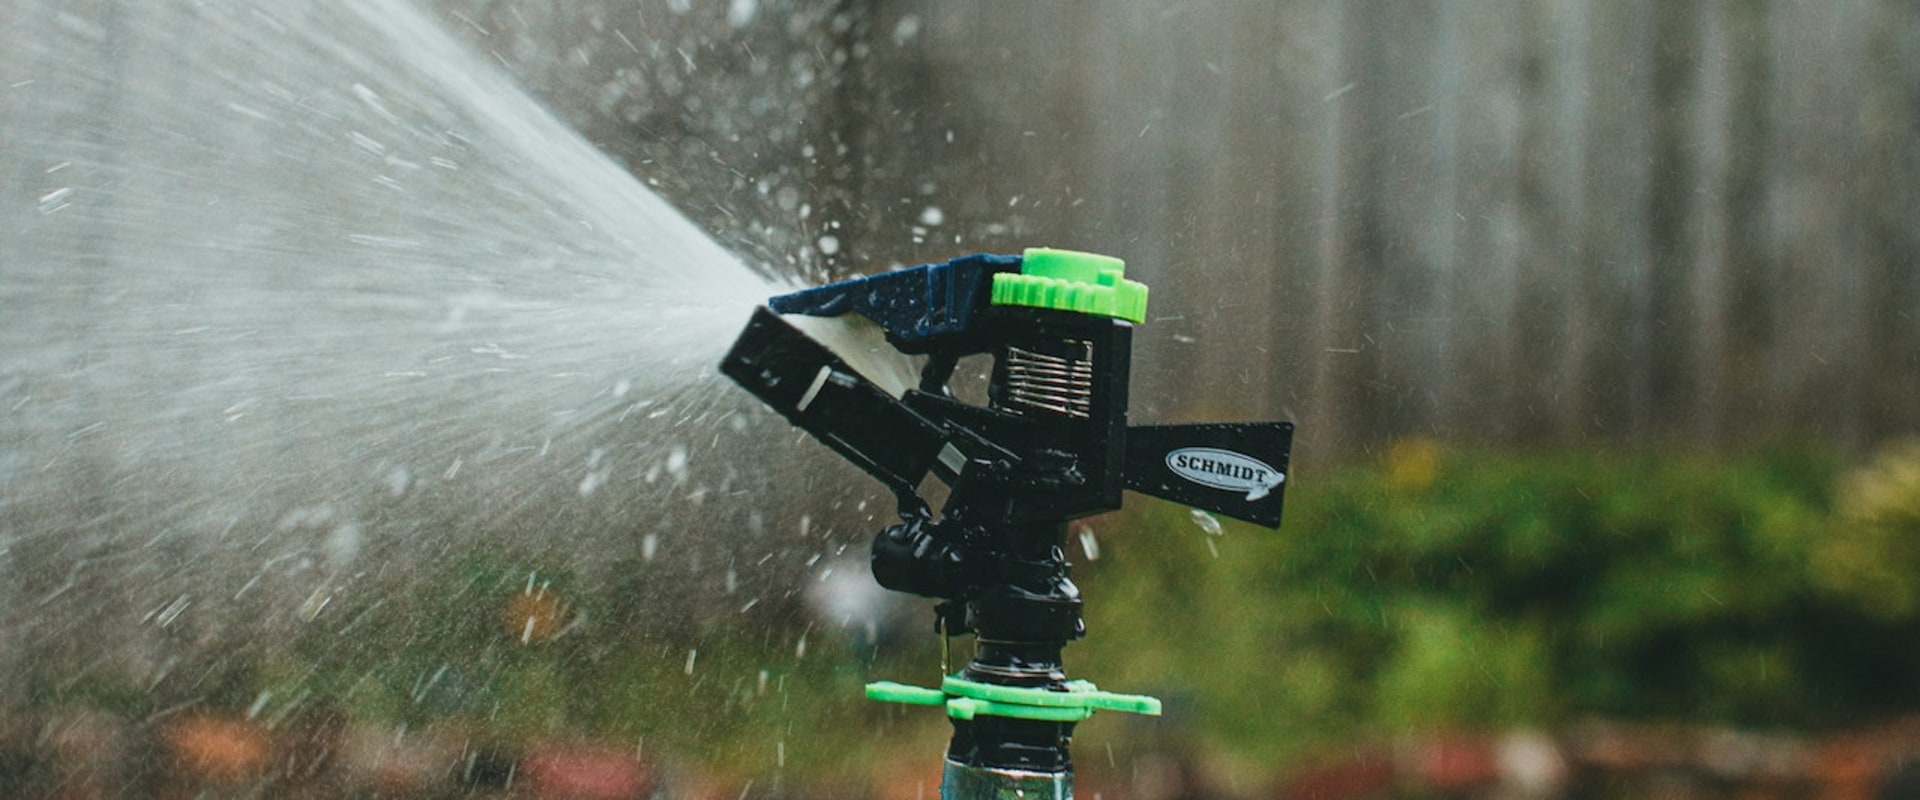 The Benefits Of Hiring Professional Sprinkler Installation Services For Your Omaha Home Renovation